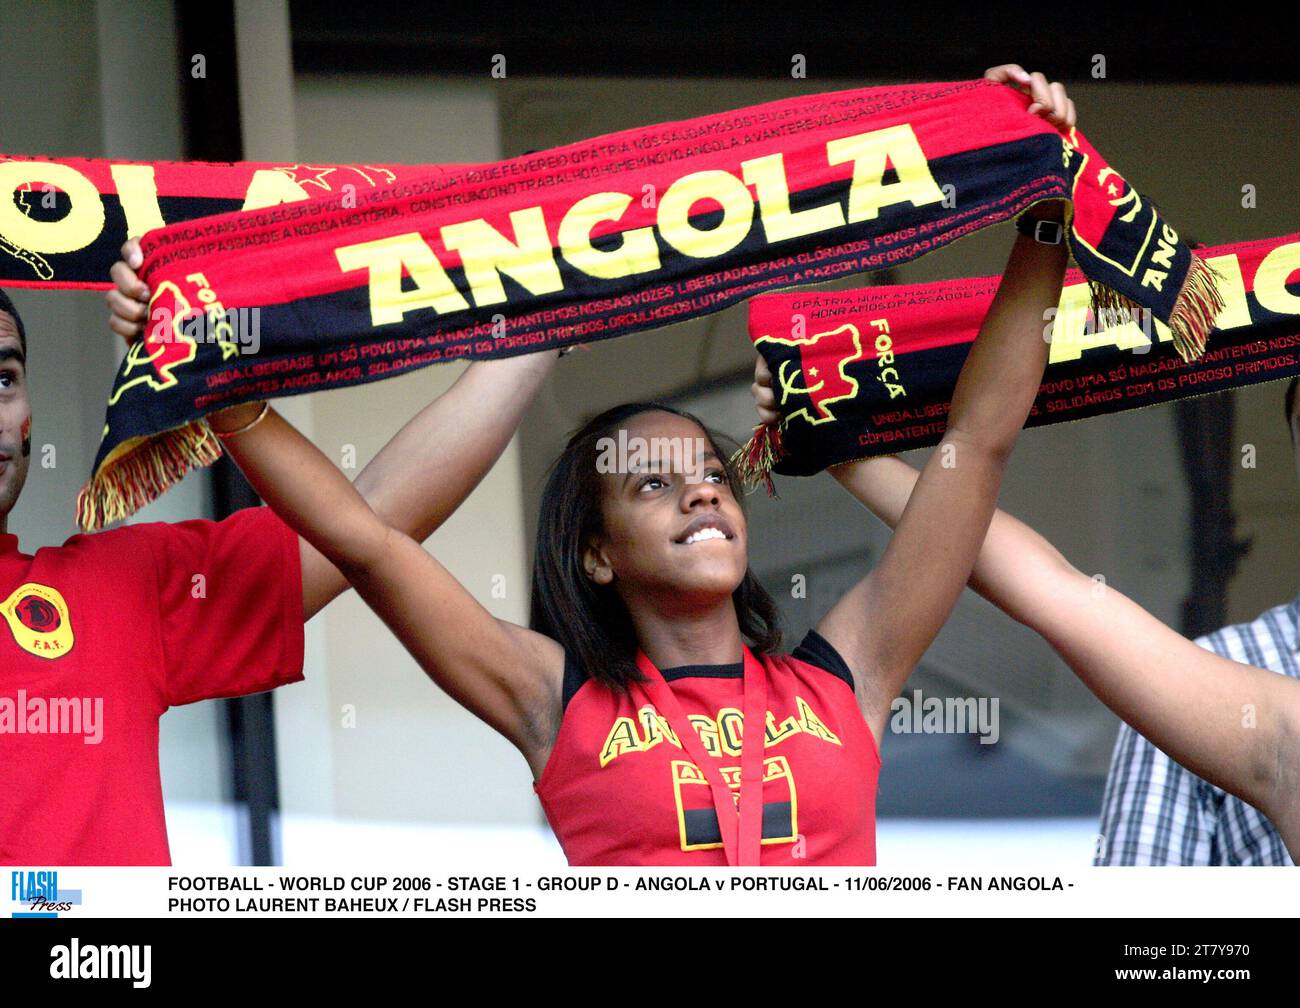 FOOTBALL - WORLD CUP 2006 - STAGE 1 - GROUP D - ANGOLA v PORTUGAL - 11/06/2006 - FAN ANGOLA - PHOTO LAURENT BAHEUX / FLASH PRESS Stock Photo